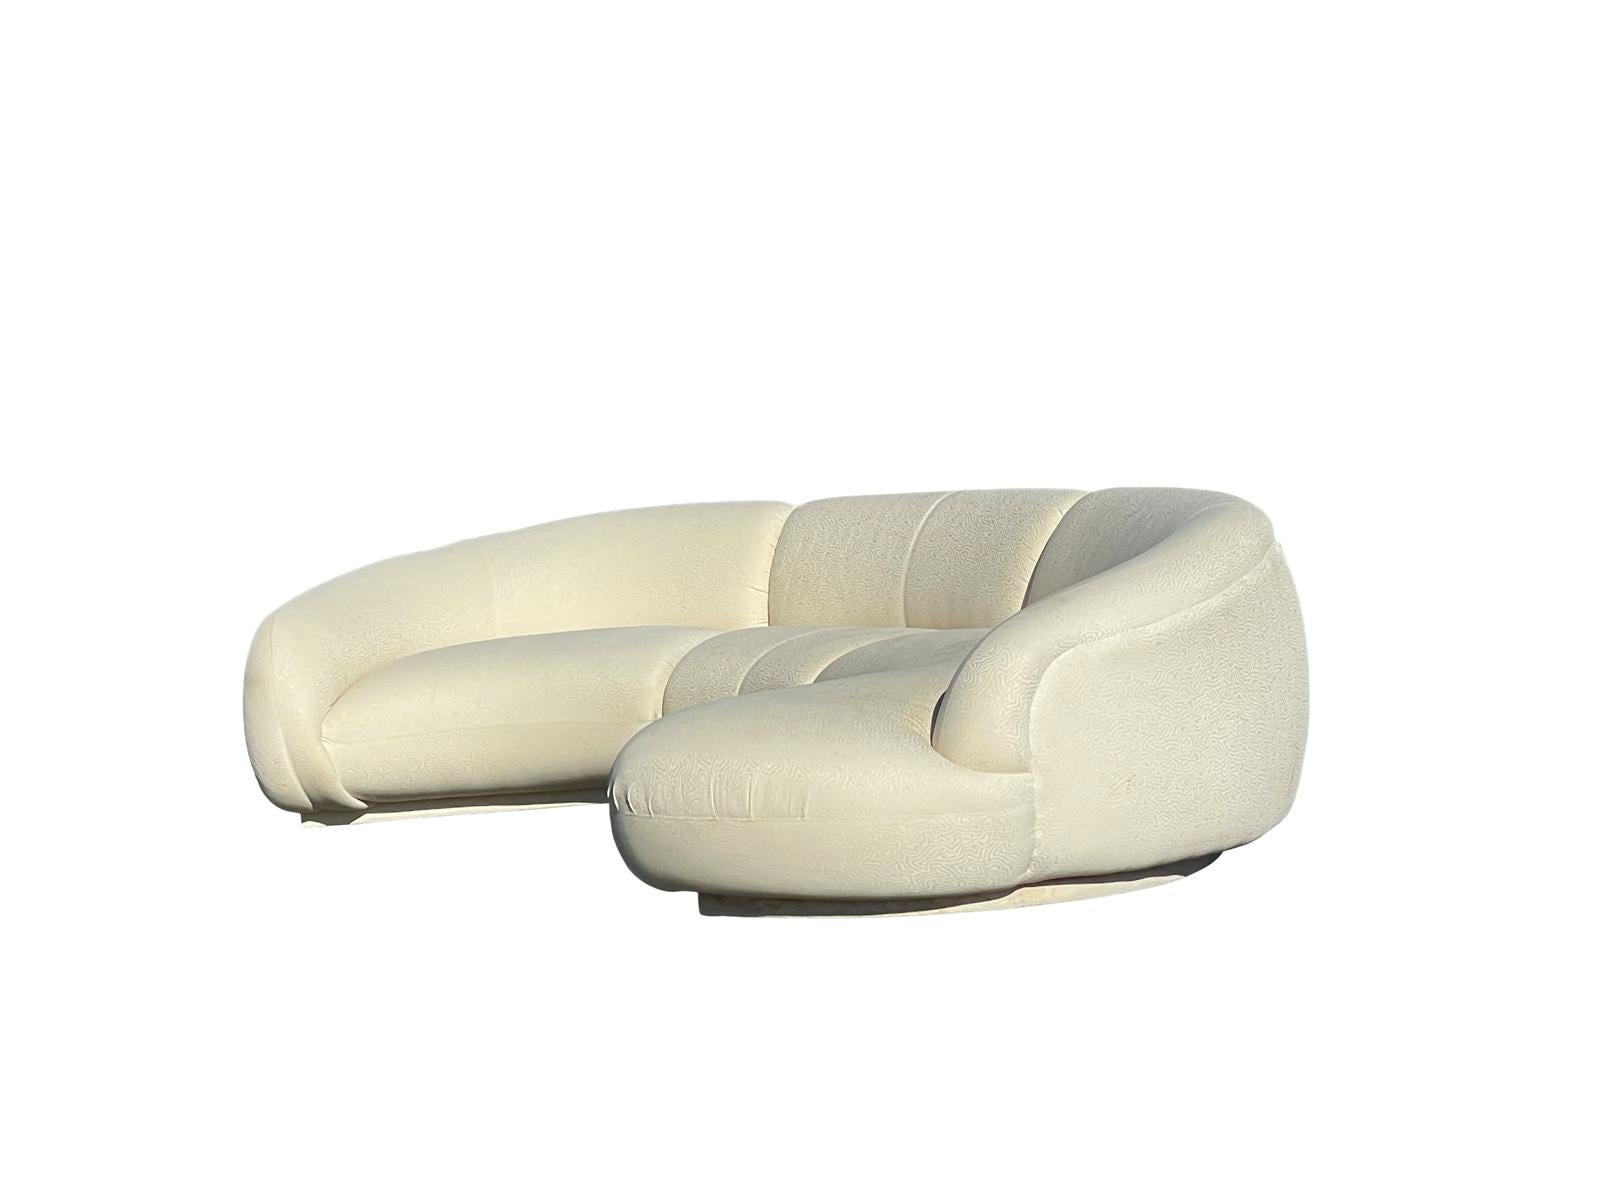 This is one unique sofa, very comfortable. The shape is amazing would be the center focus point of any room Made by Preview Furniture 